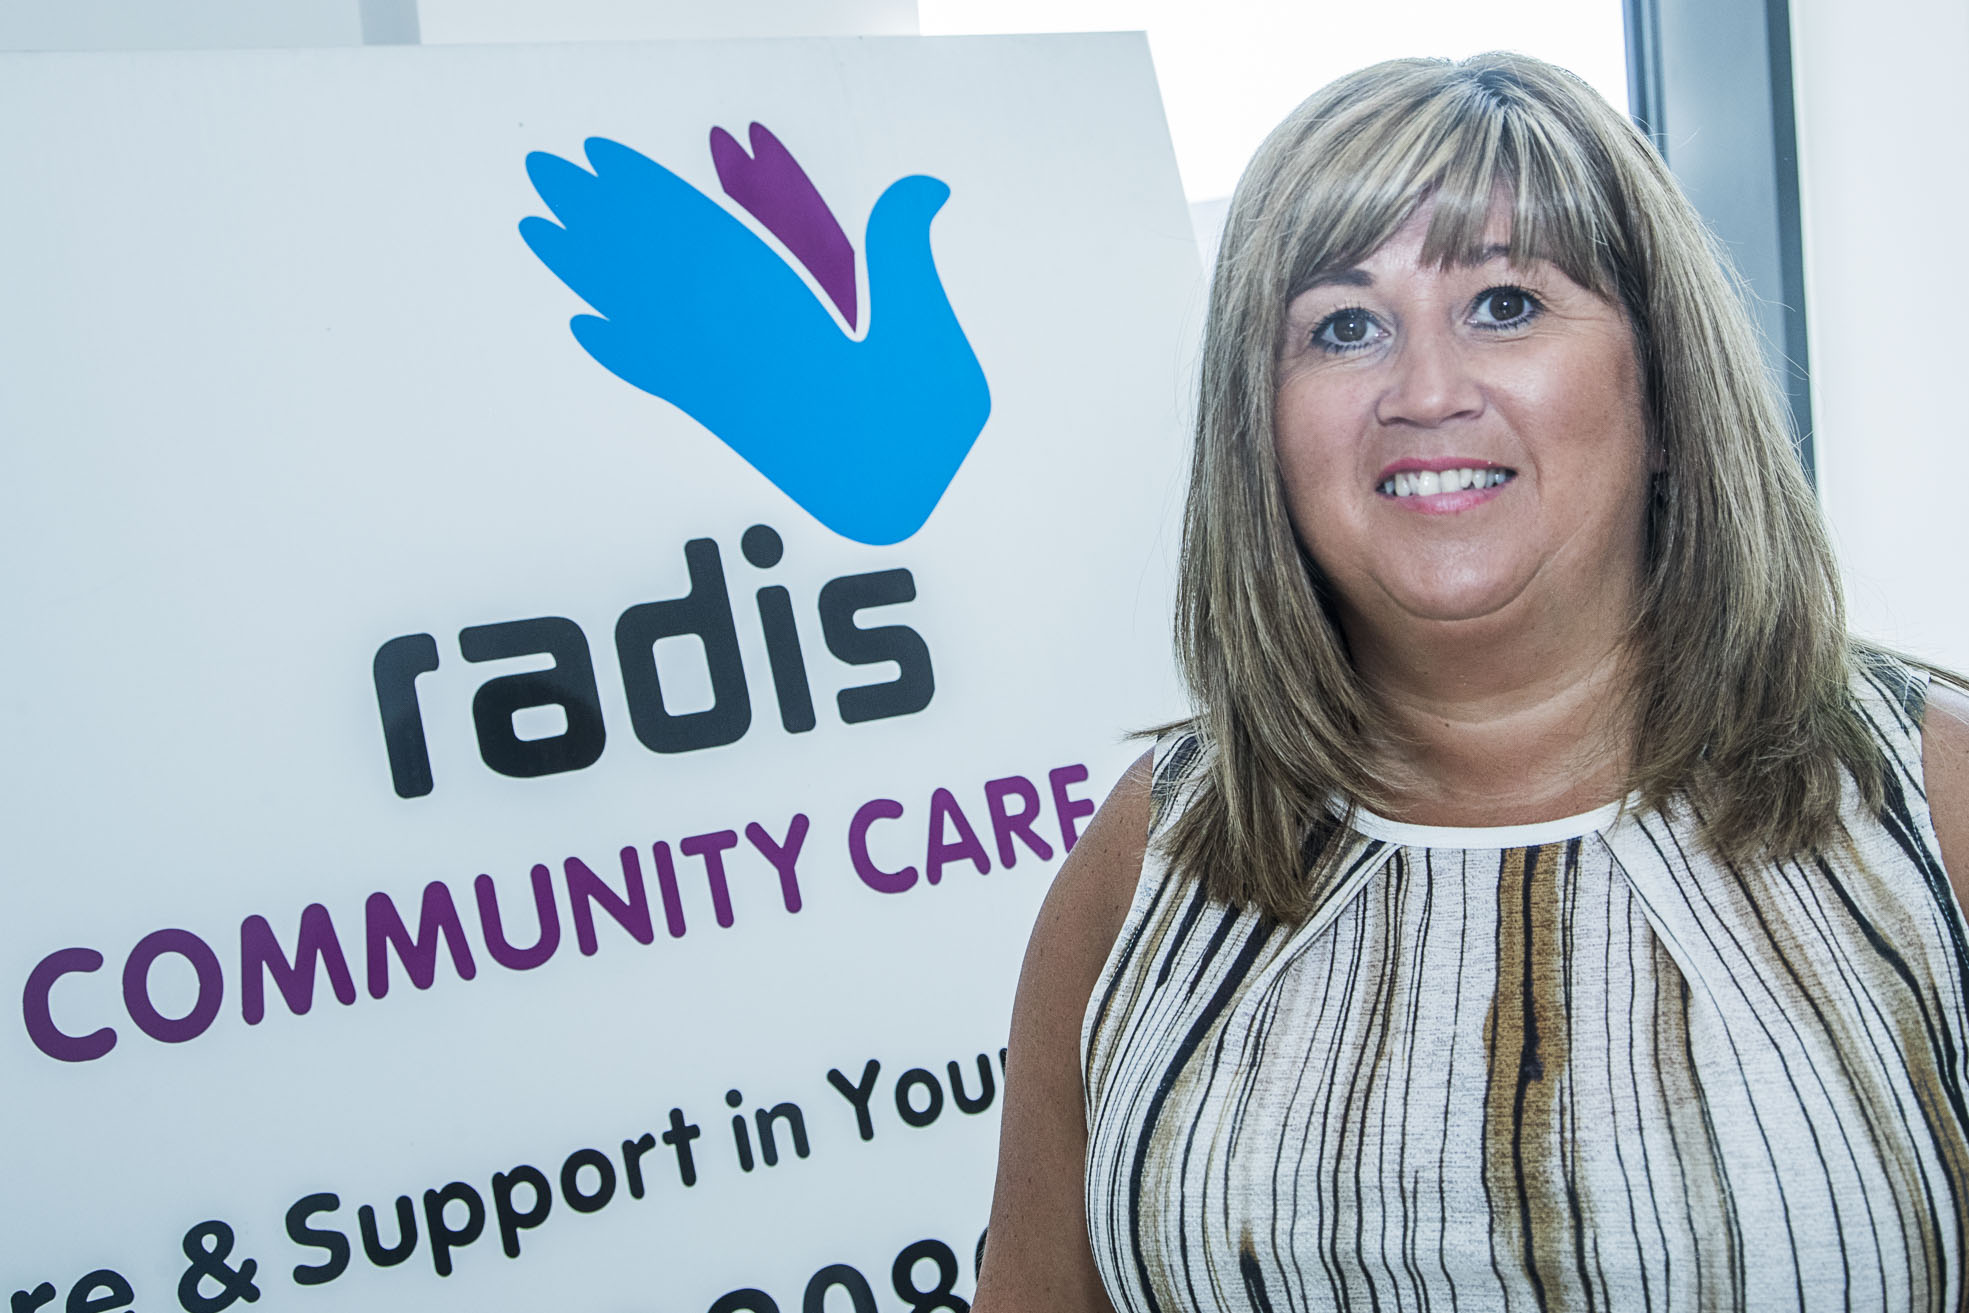 Home care assistant manager who harmonises with people by singing Tom Jones hits is in running for major award